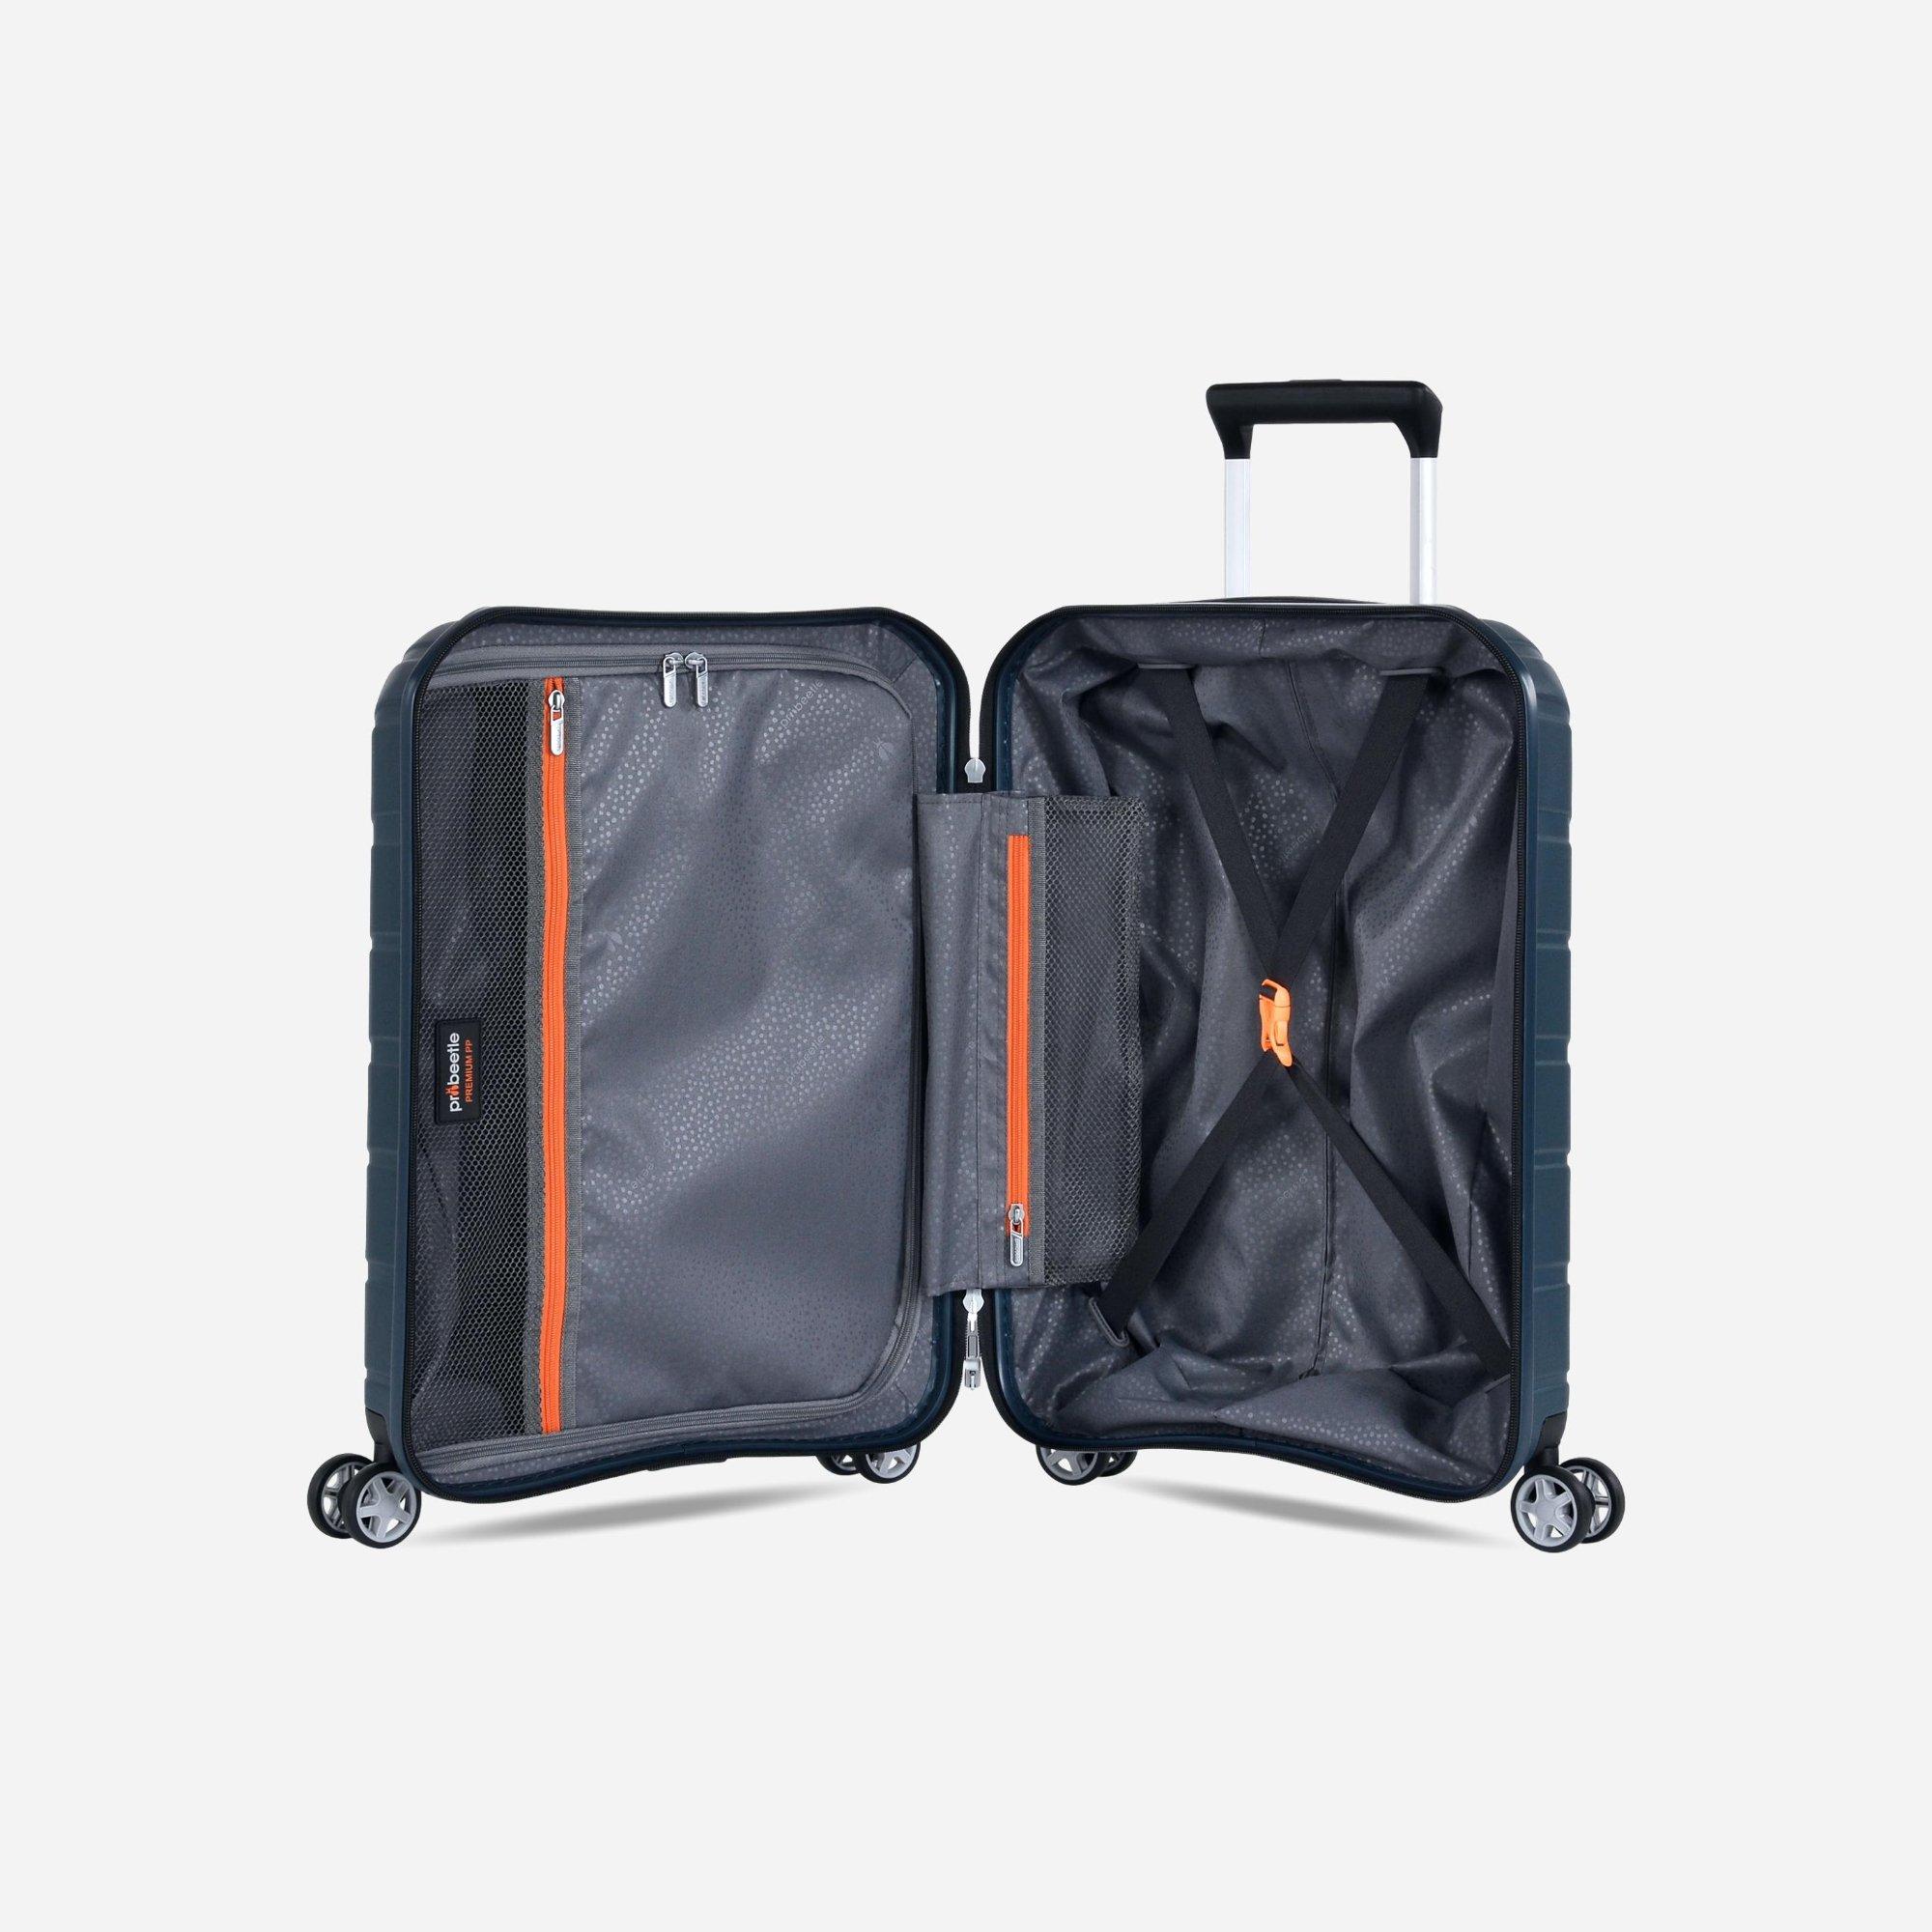 Probeetle by Eminent 55 CM, Voyager XXI Valise Cabine 4 Roues  